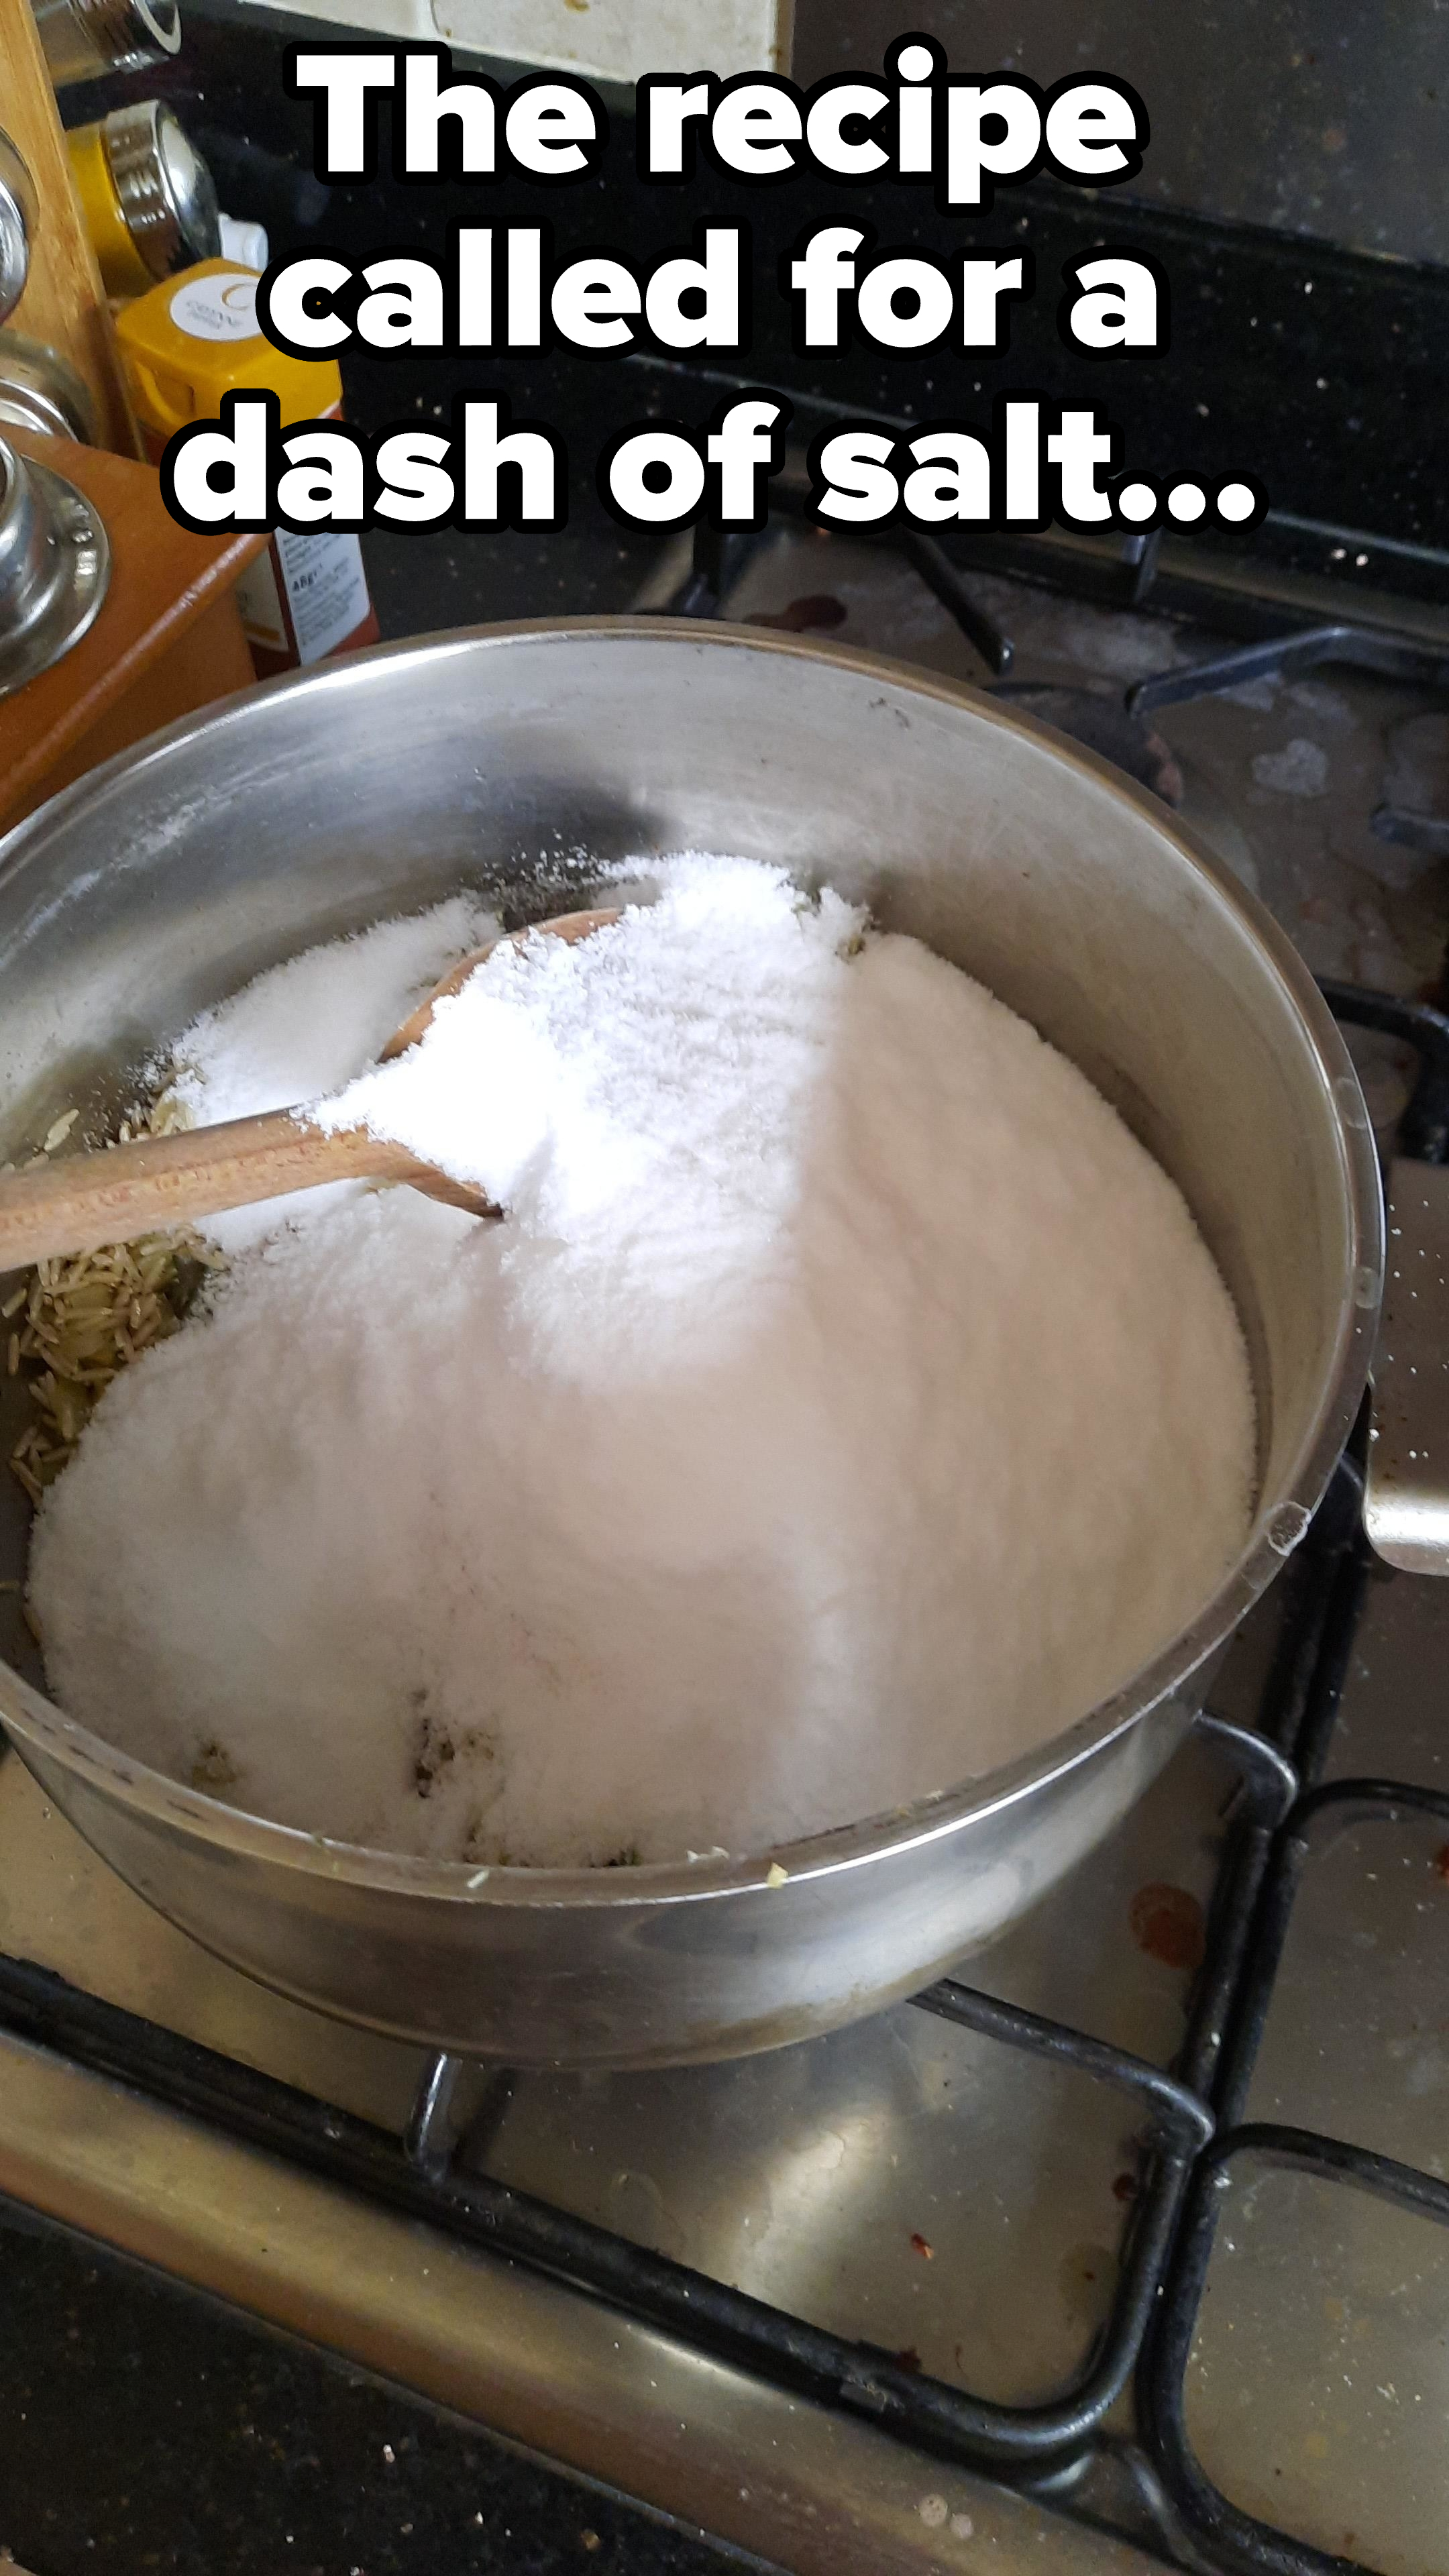 A pot on a stove with a pile of salt in it, with caption &quot;The recipe called for a dash of salt&quot;